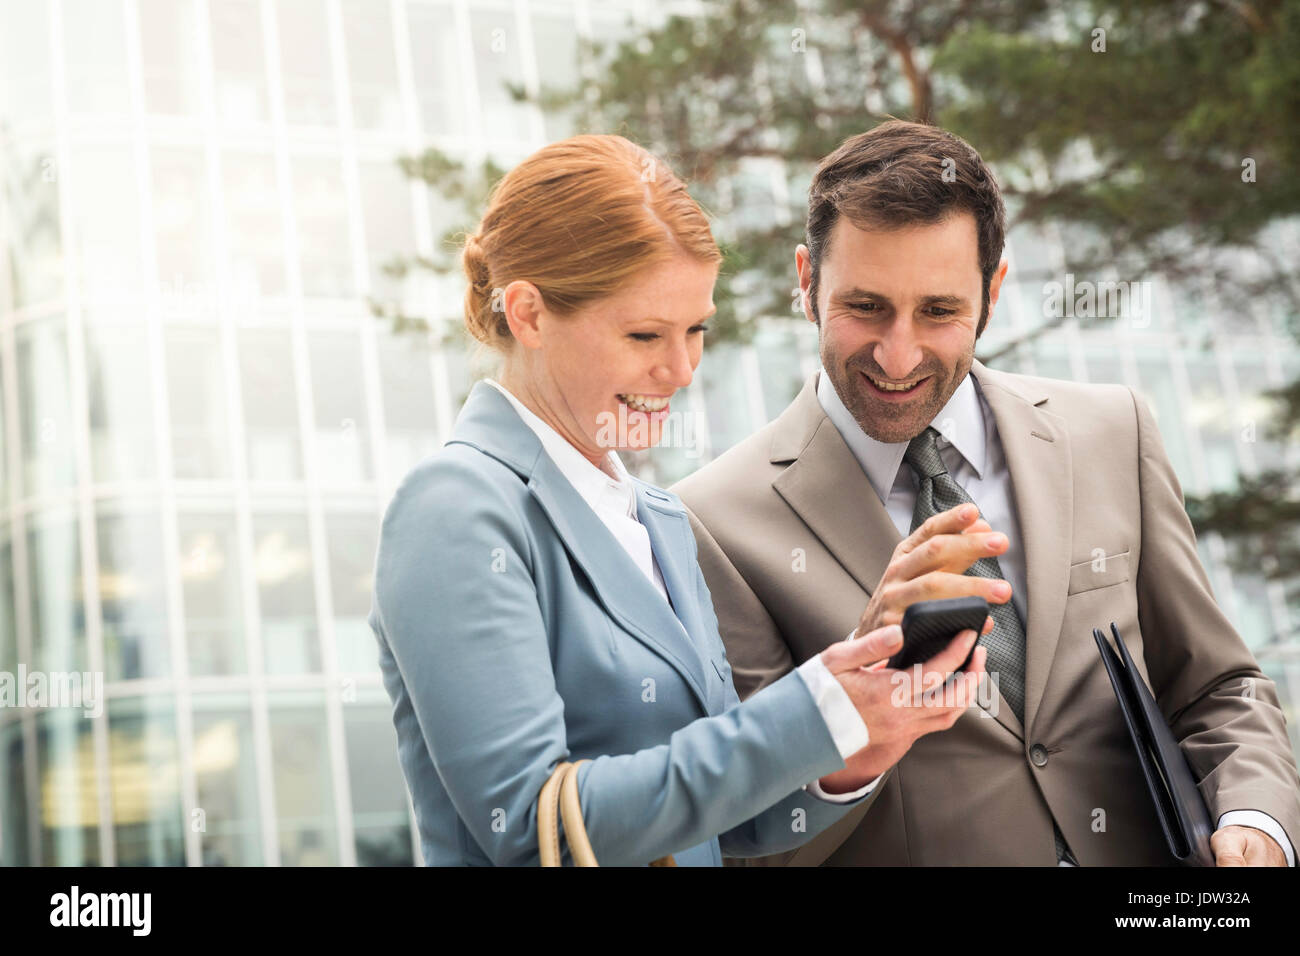 Business people using cell phone Stock Photo